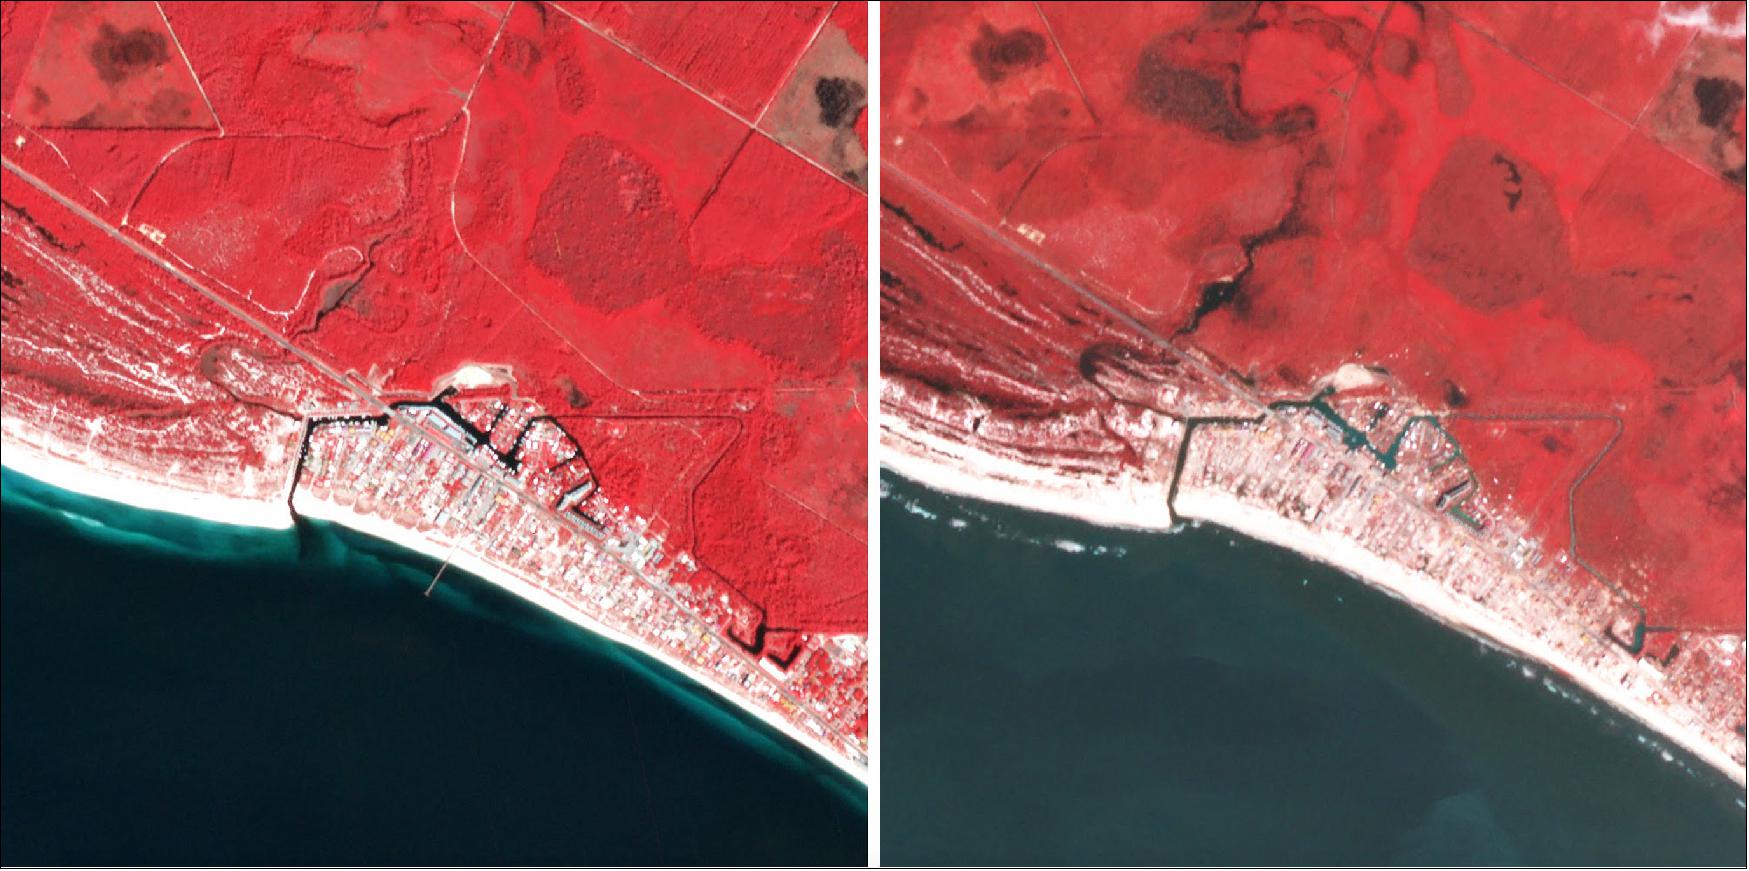 Figure 6: These two false color PlanetScope images show the direct aftermath of Hurricane Michael on the coastal community of Mexico Beach, Florida. In the second image, taken on October 11, 2018, the day after the hurricane made landfall it is possible to see large areas of damage and inland flooding throughout the community (image credit: Planet)